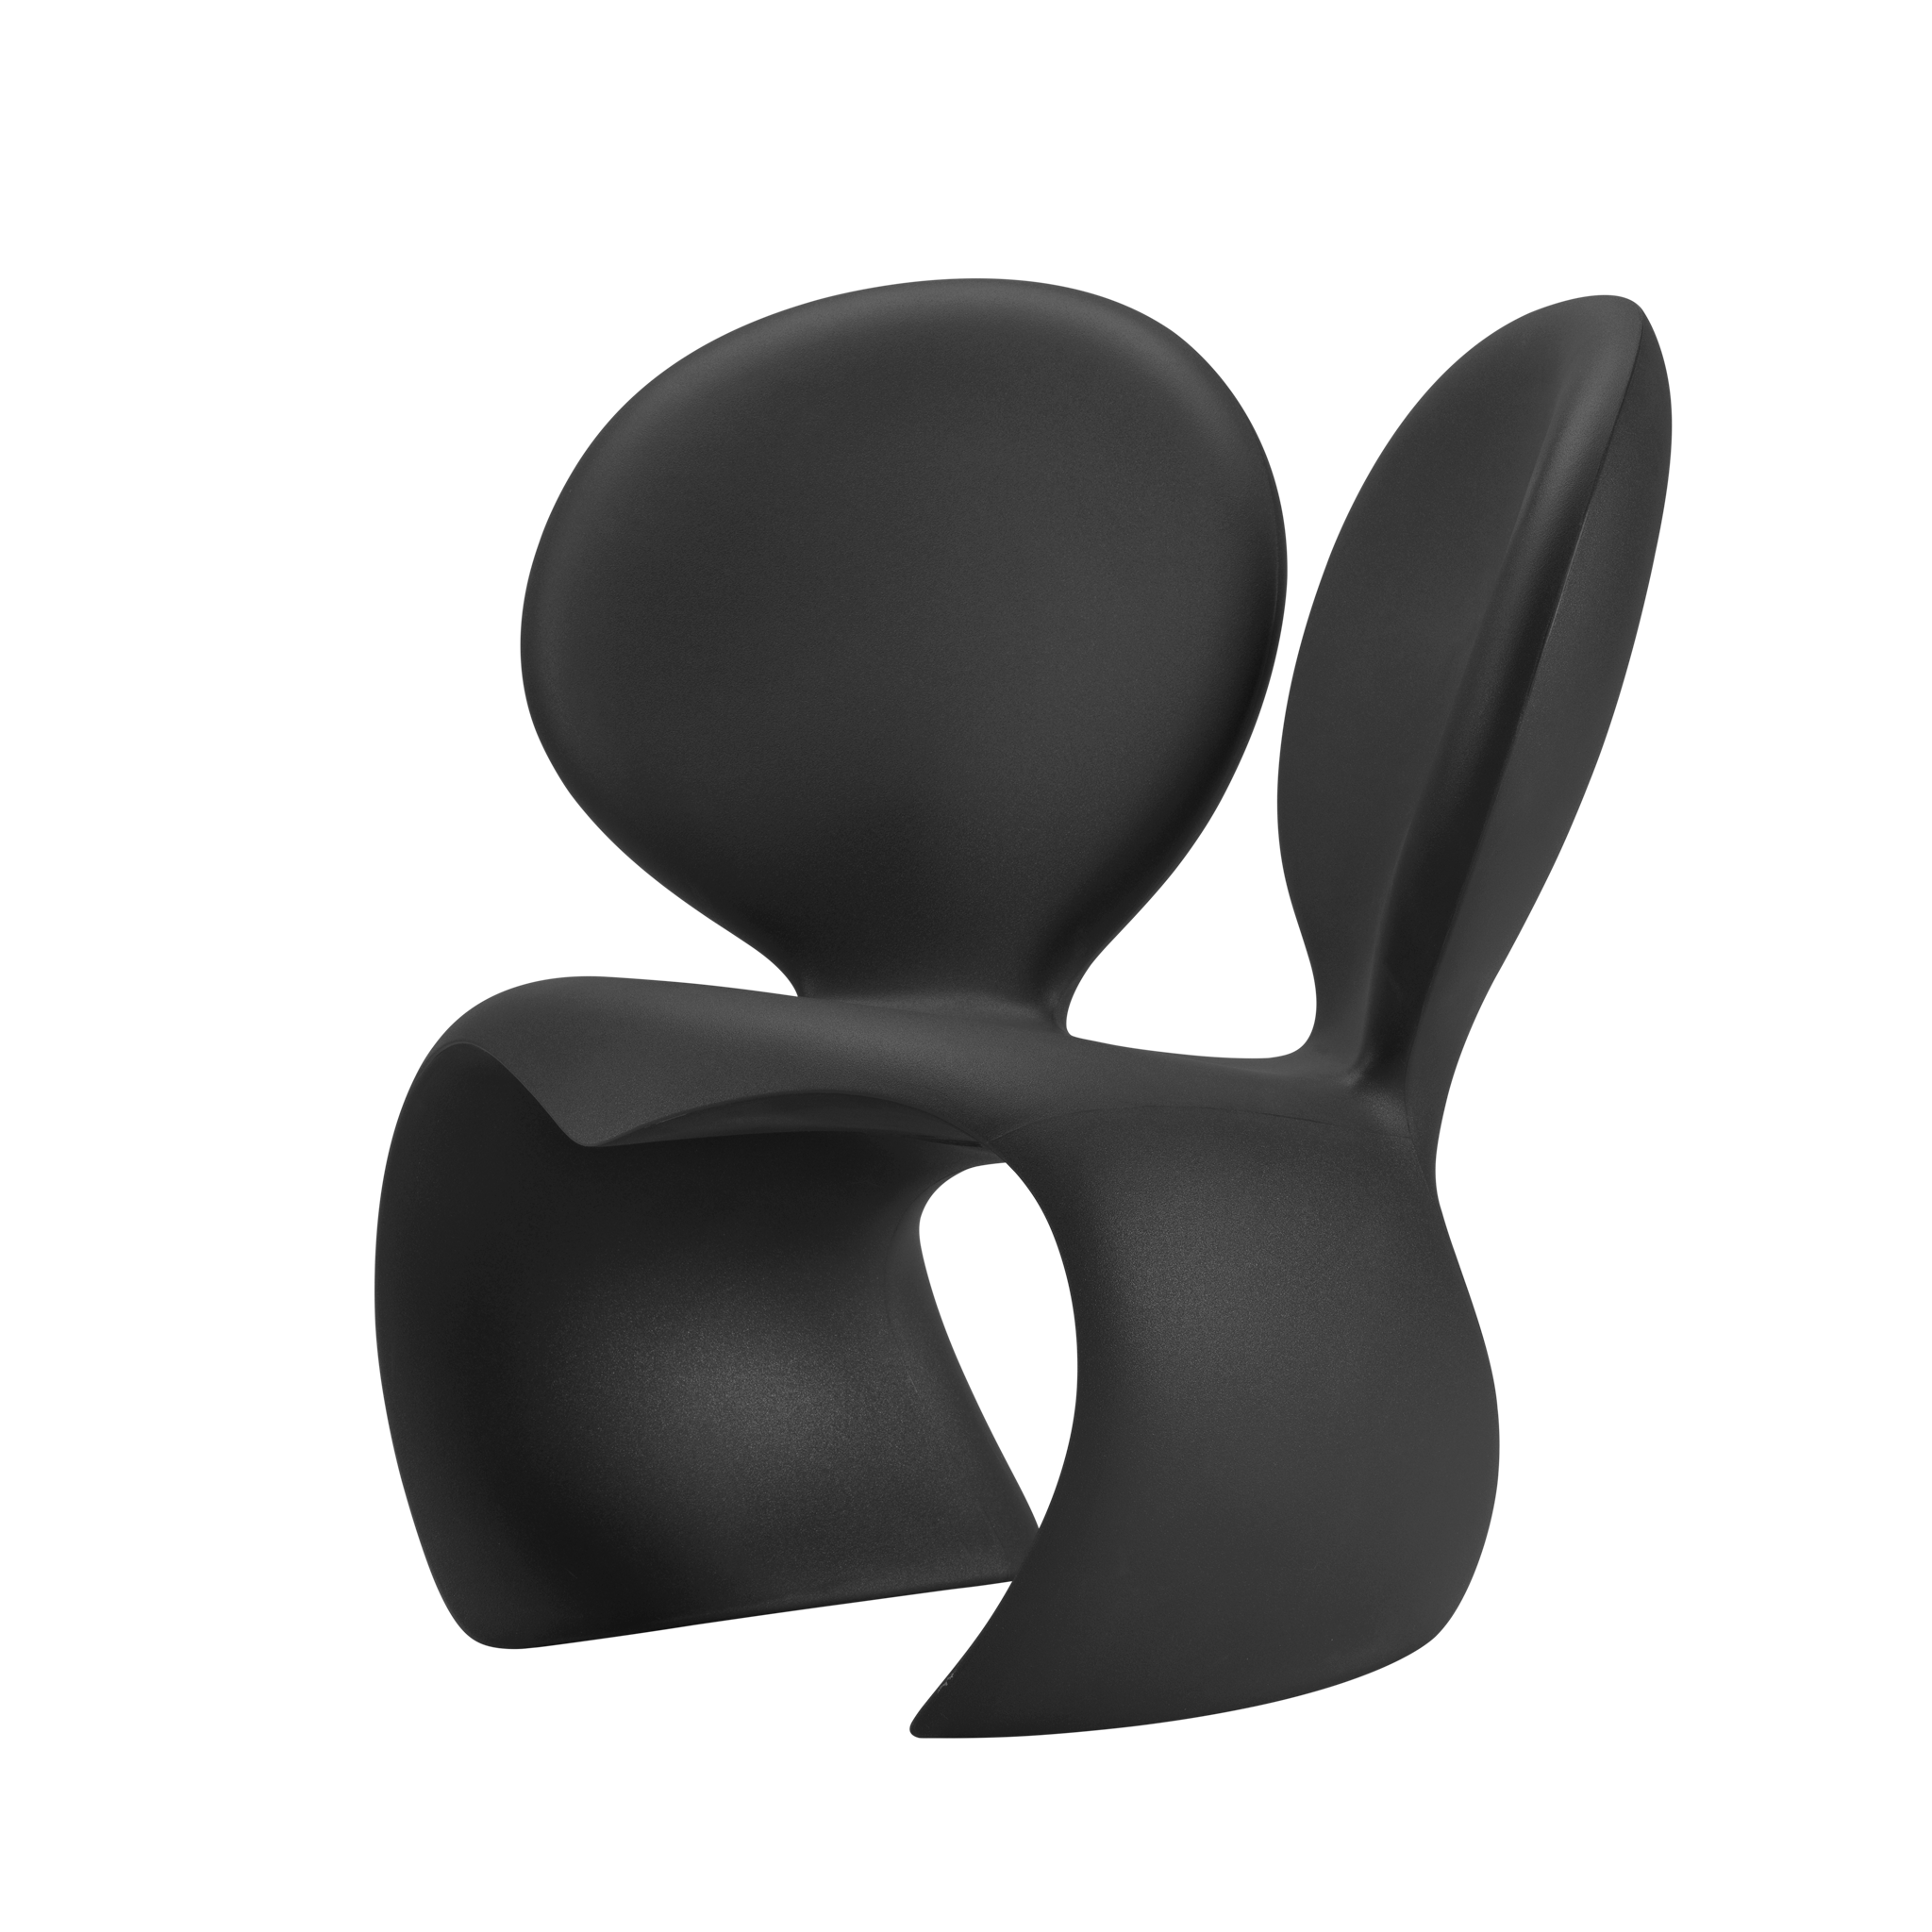 Queboo Don't F**K With The Mouse Armchair, Black